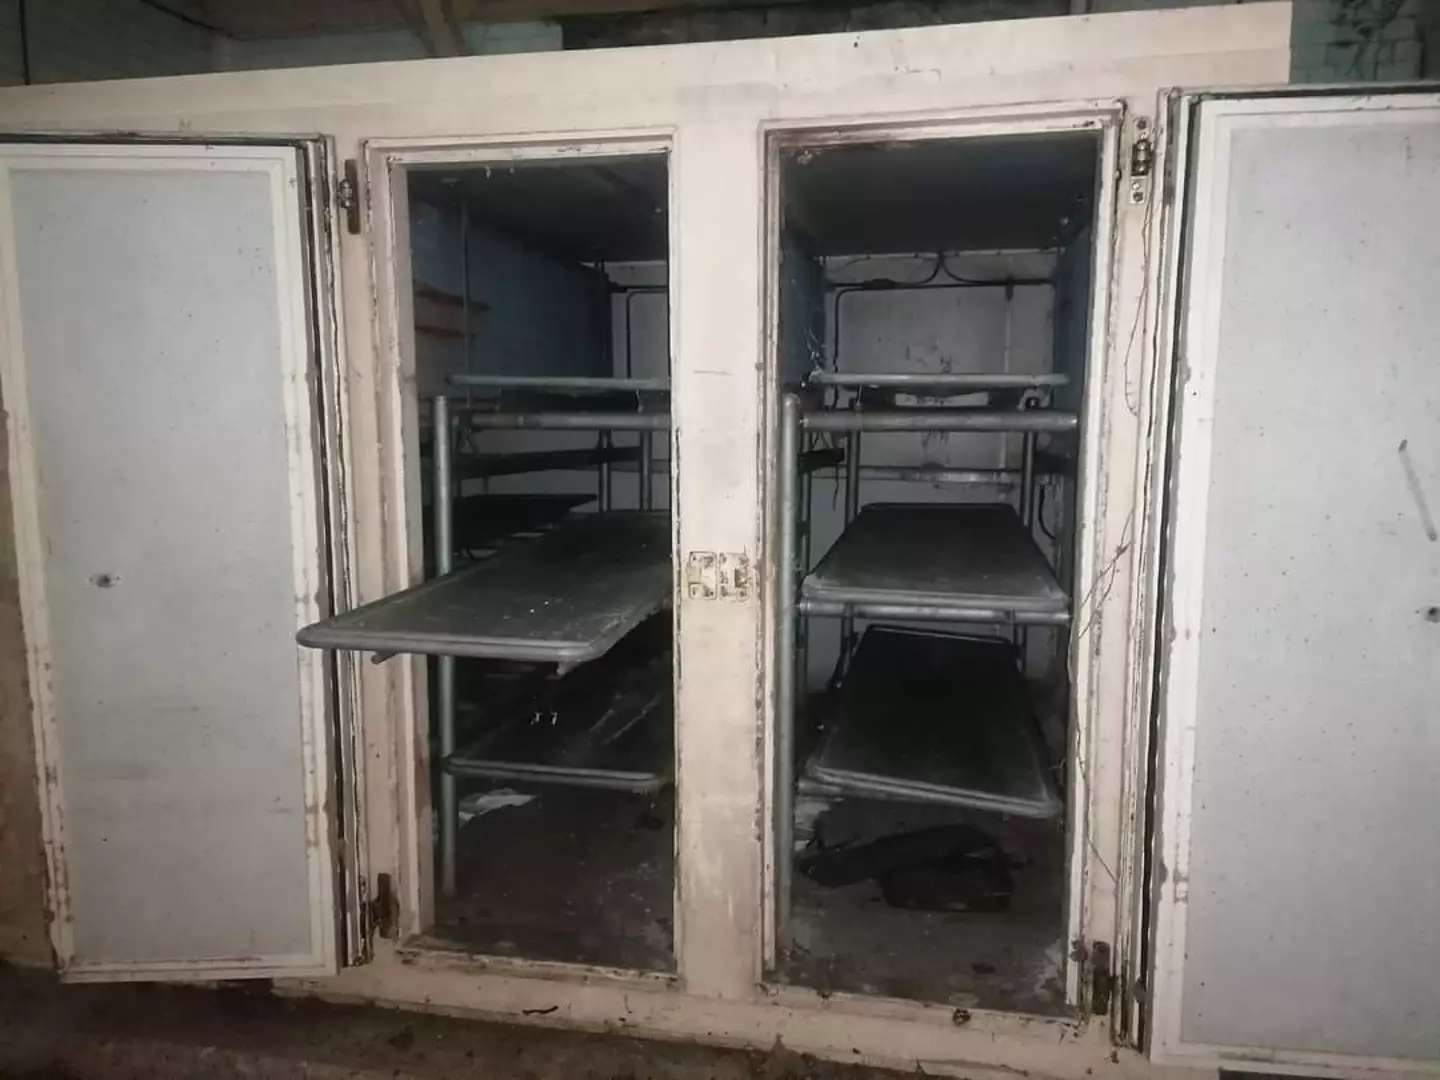 The body lockers in a morgue discovered by explorers.